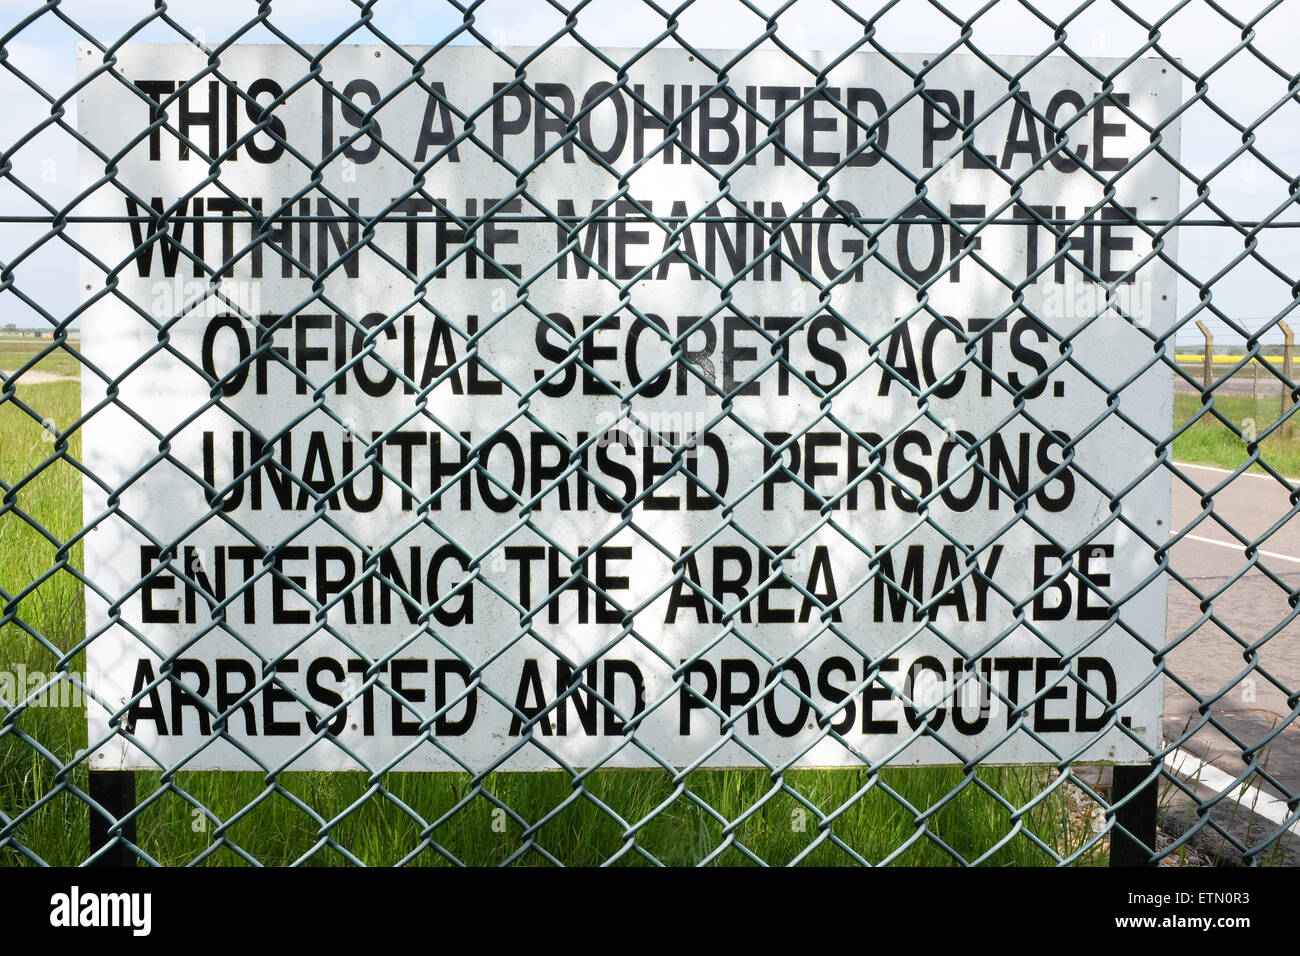 Ministry of Defence official secret act notice, behind a wire fence. Stock Photo